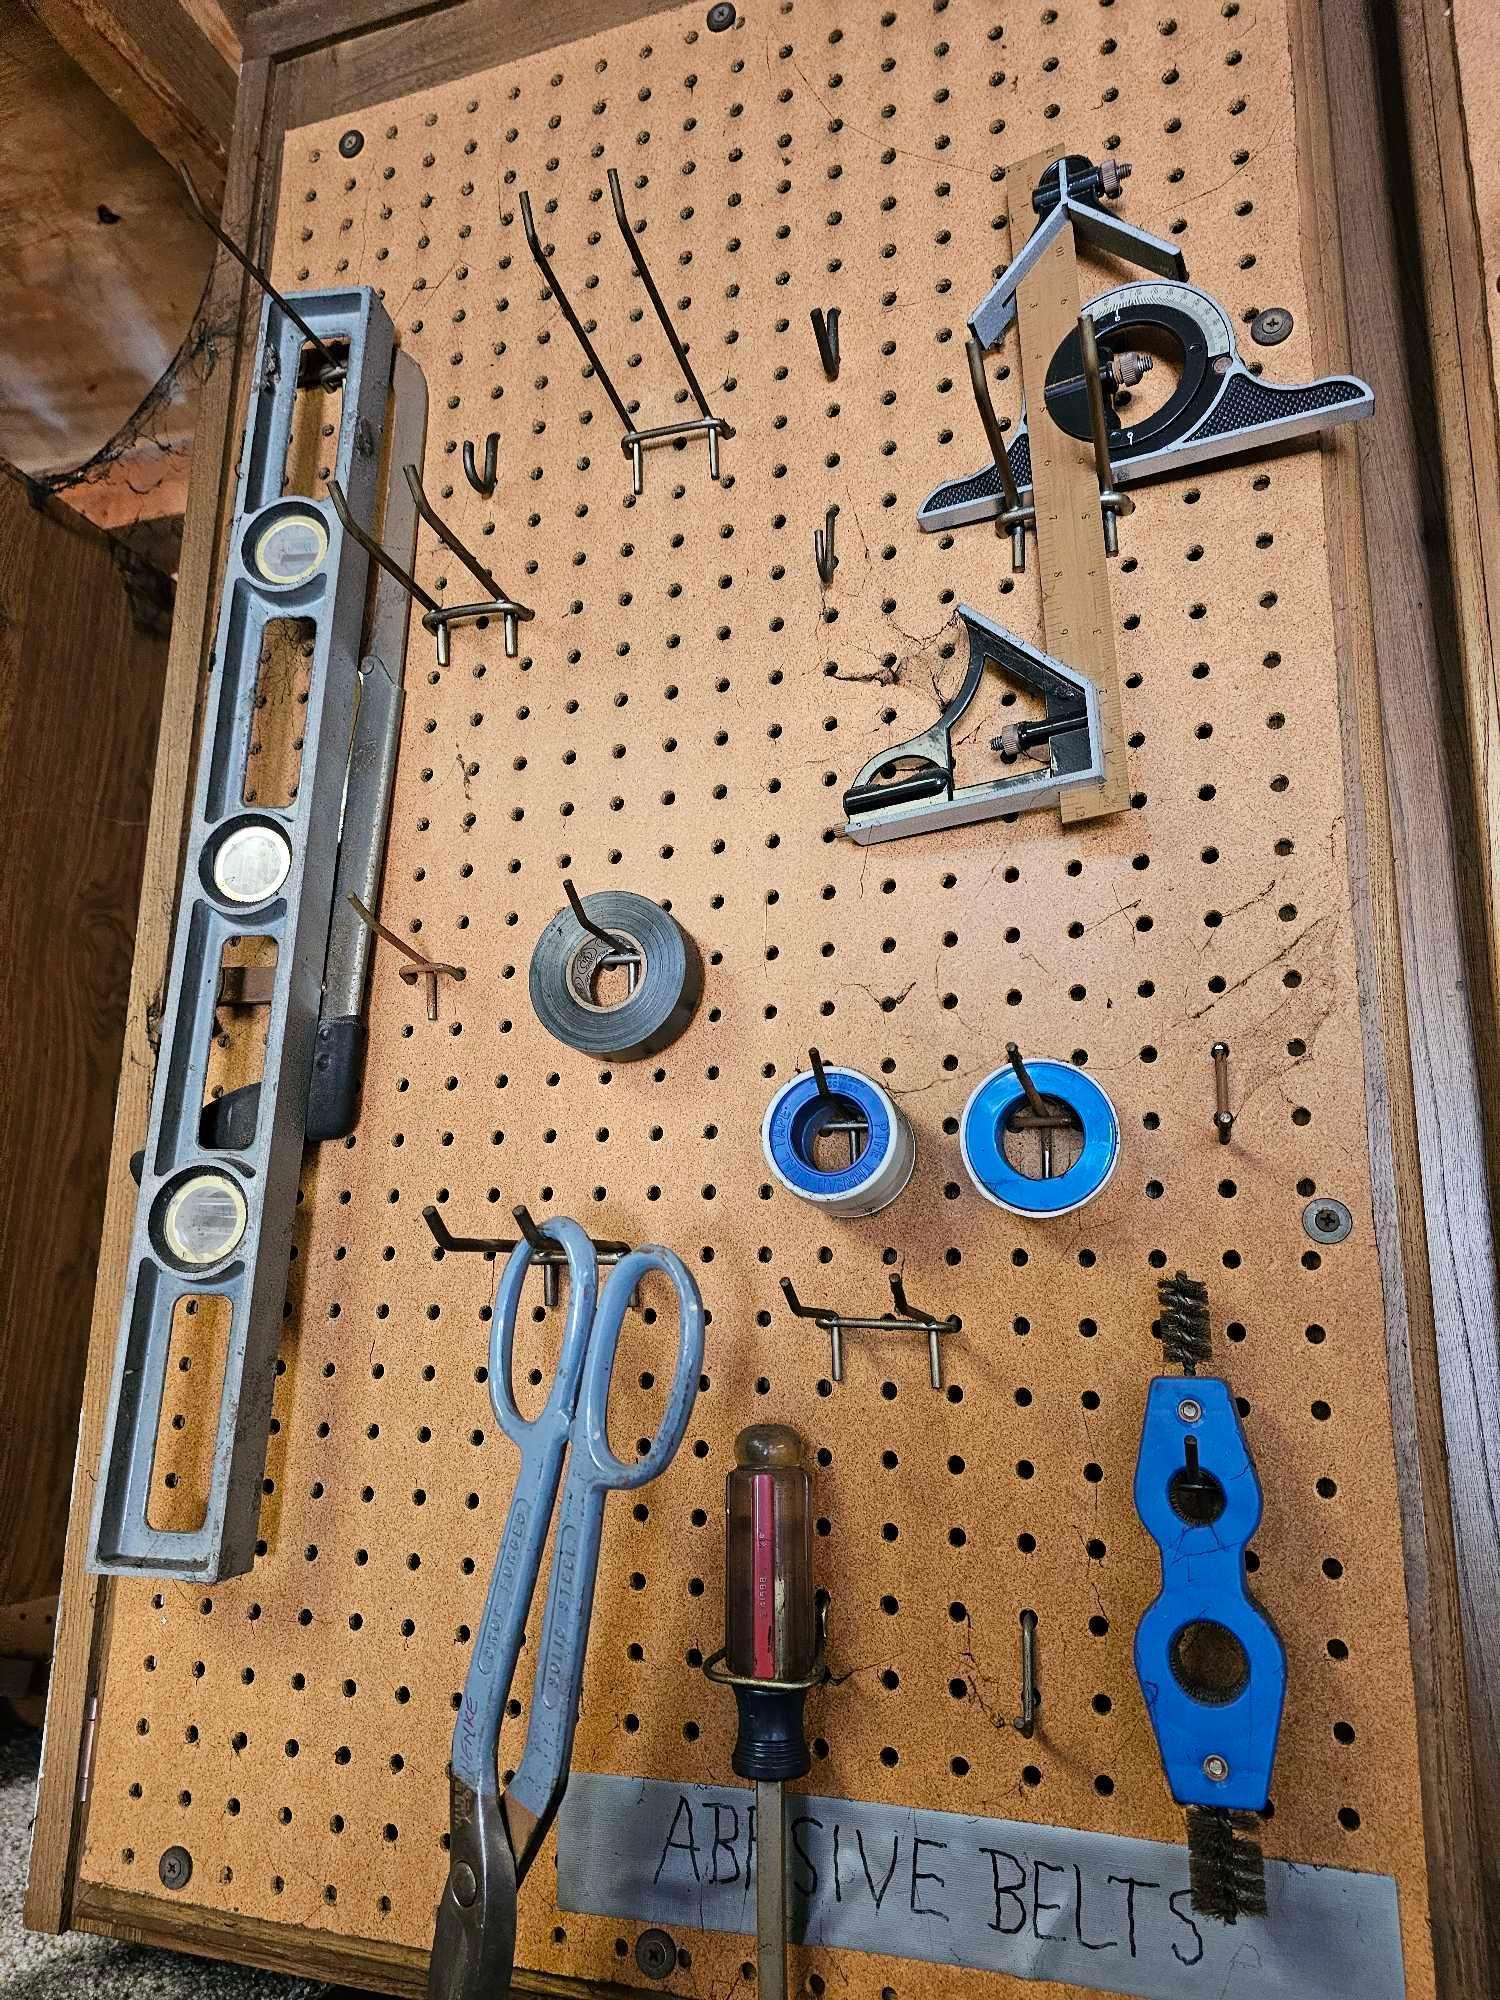 PEG BOARD WITH HAND TOOLS